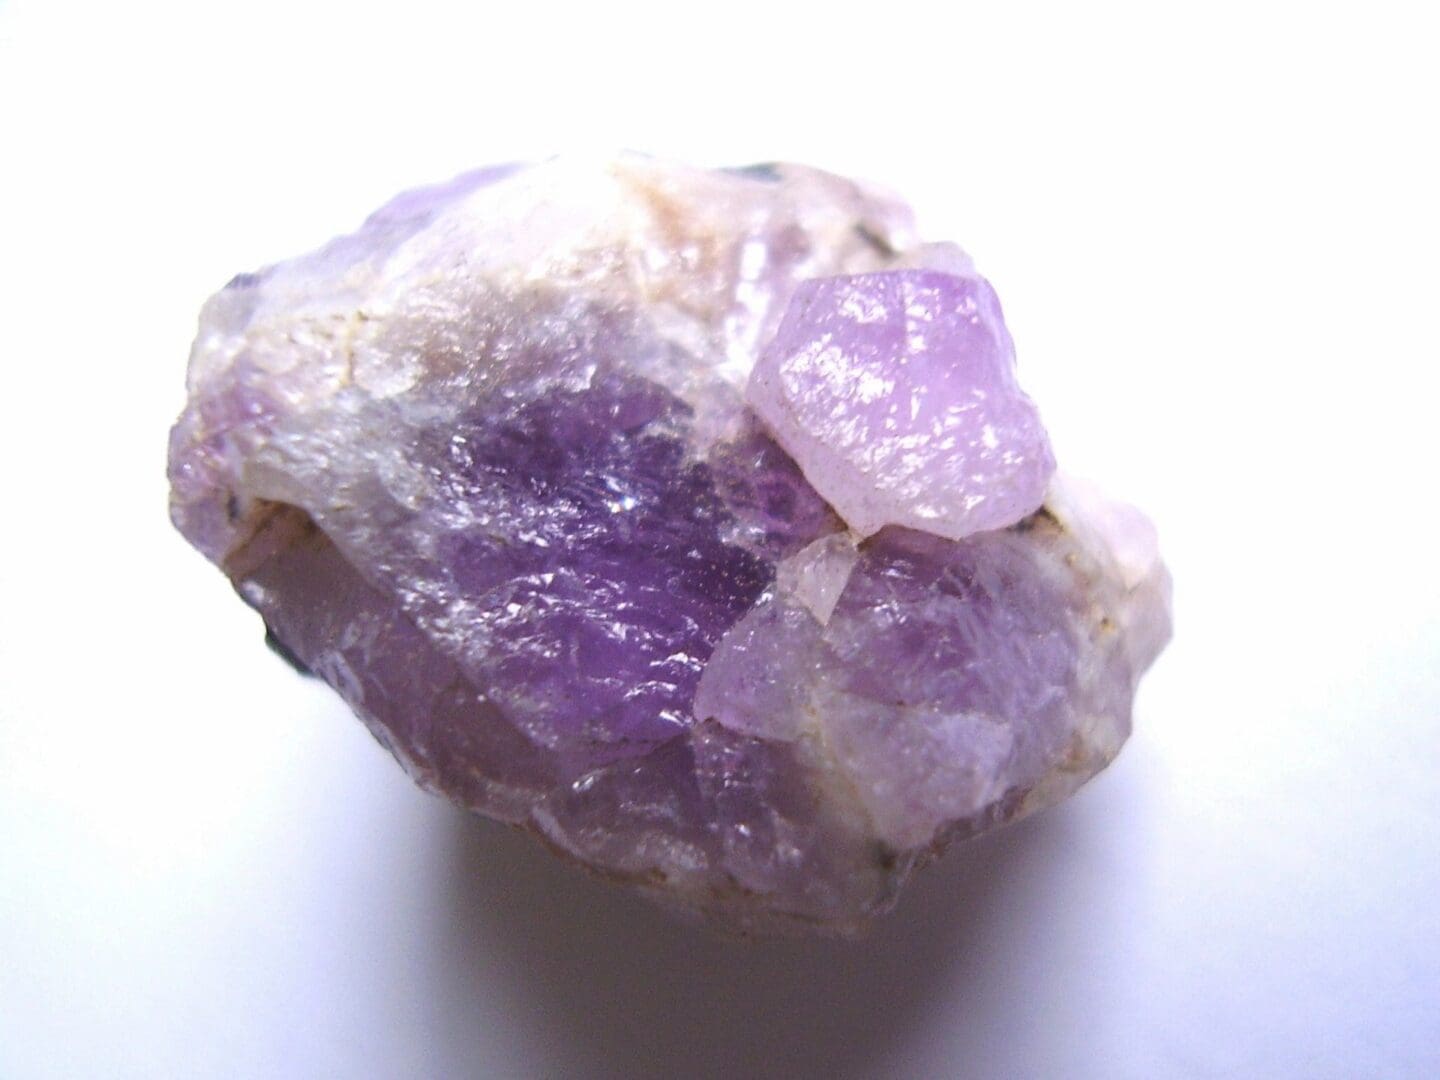 A purple rock with some kind of substance on it